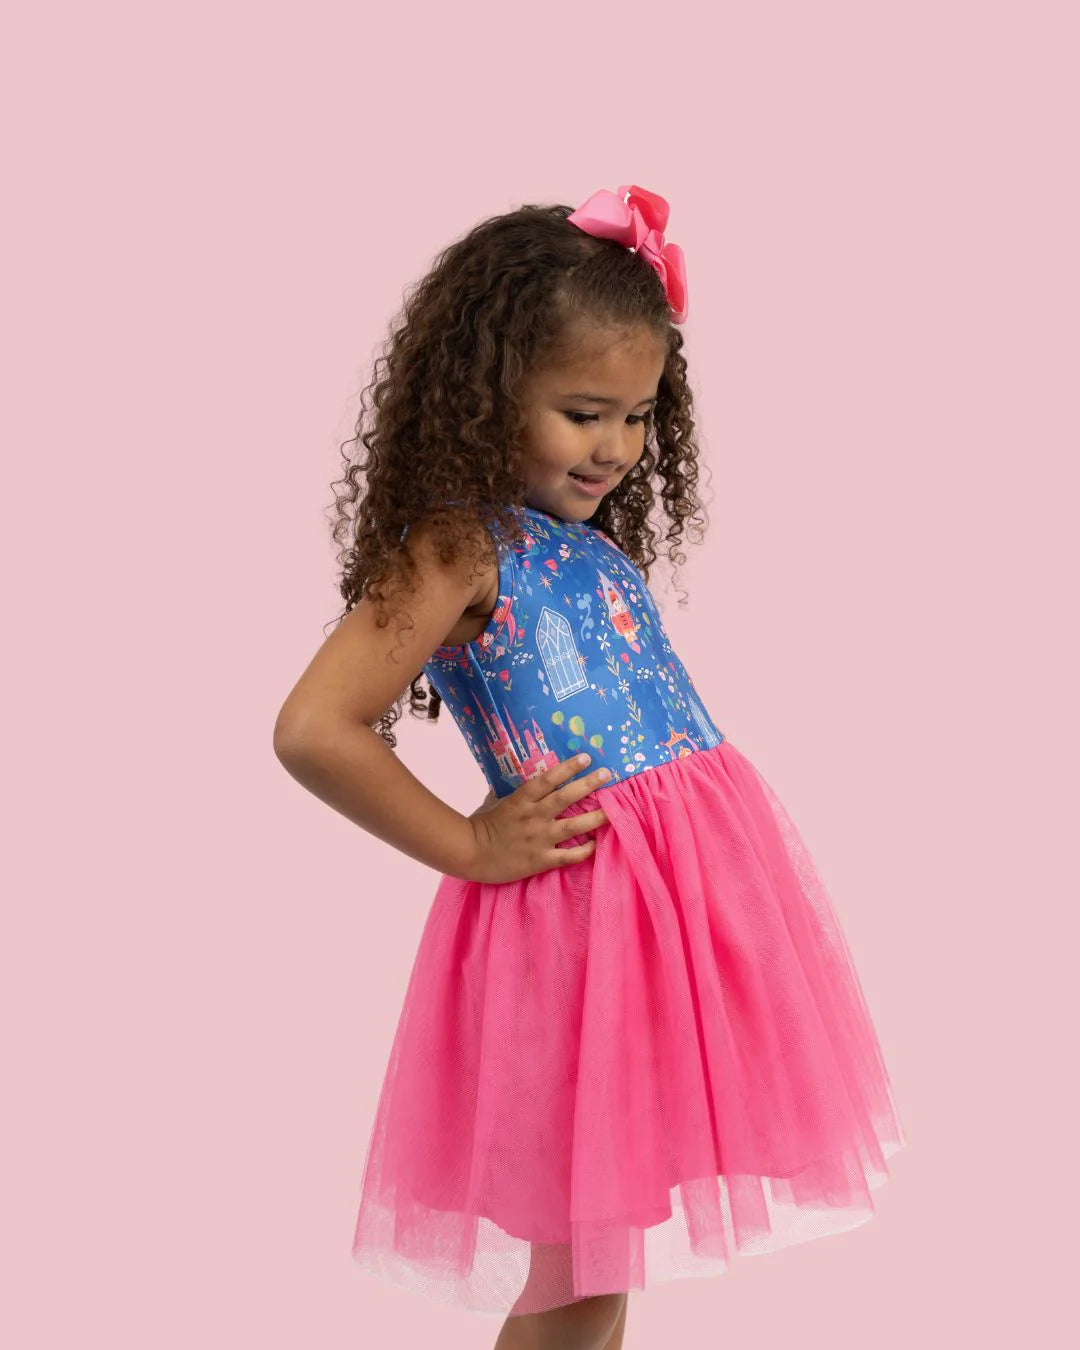 (Preorder) Dream Spell Tulle Dress by Pete + Lucy